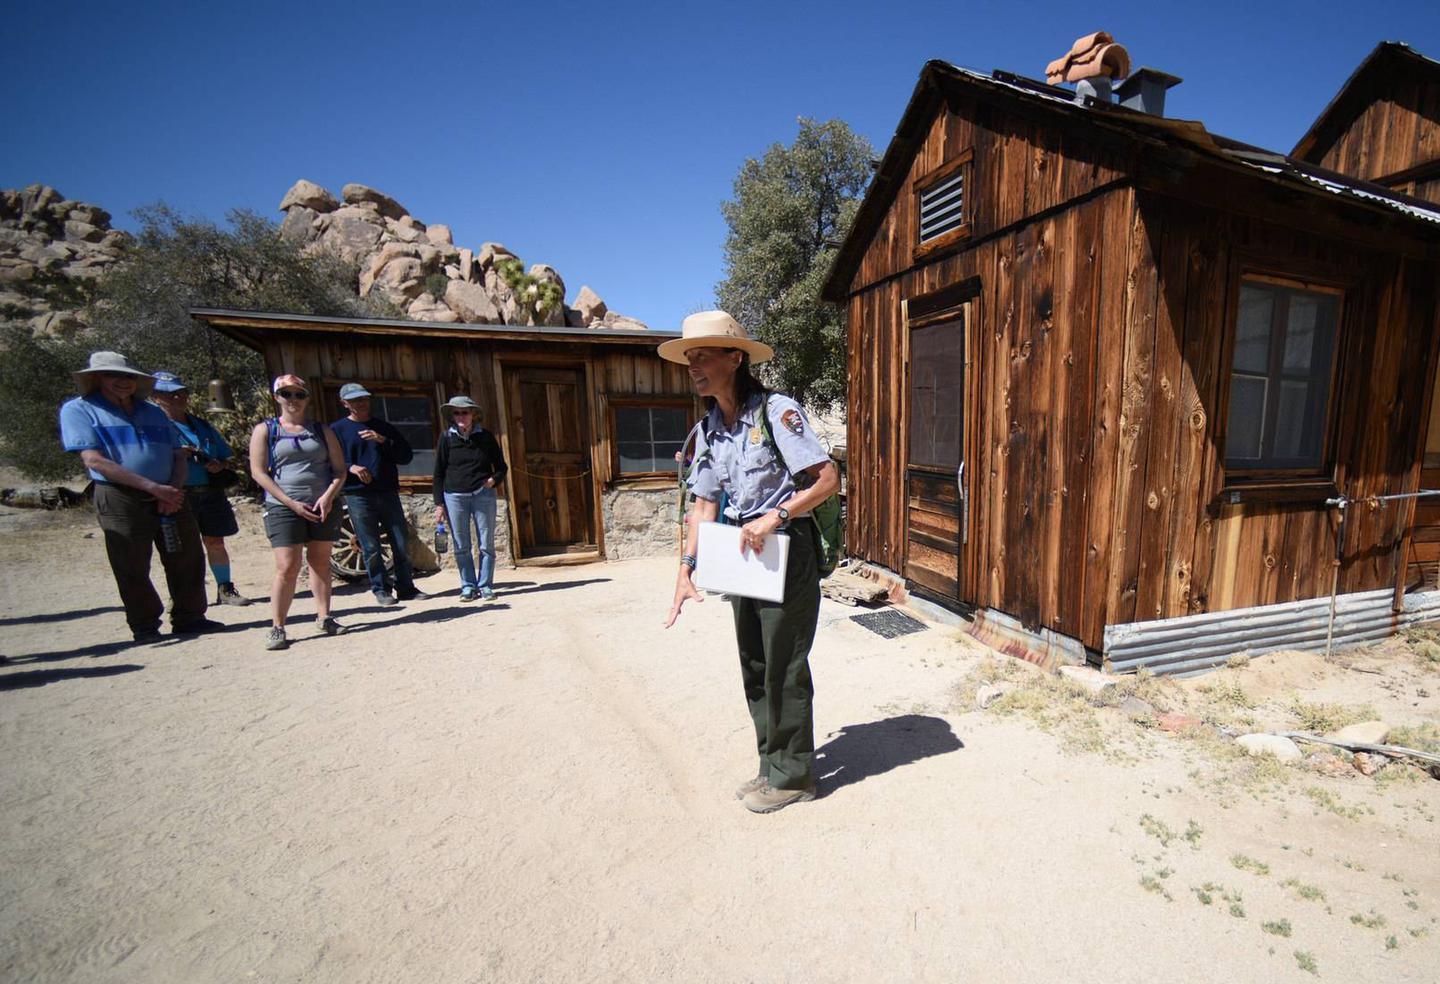 A woman wearing a NPS uniform is addressing a group of people in front of a historic ranch.Tours at Keys Ranch give visitors a unique experience to learn about the Keys family and their survival in a harsh desert environment.